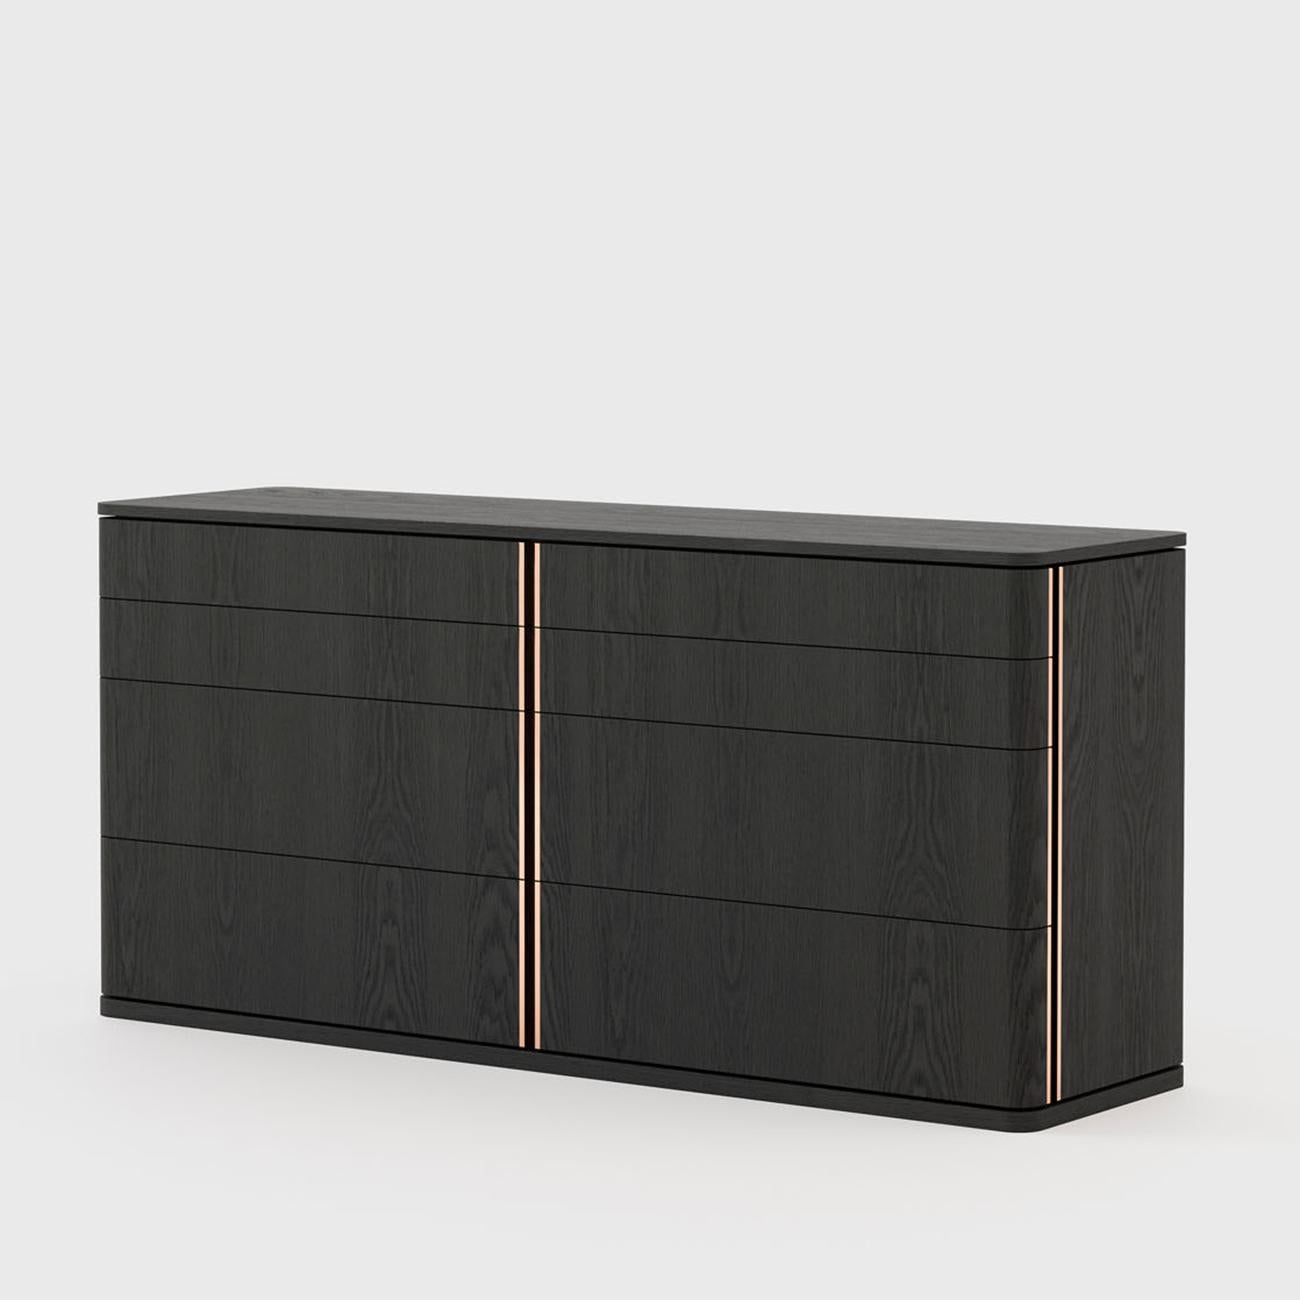 Chest of drawer Aroa large with solid wood structure, in black
ash finish. With 8 drawers on easy glide metal runners with
polished stainless steel edging trim in copper finish or in brass
finish or in chrome finish with an edging trim reminder the